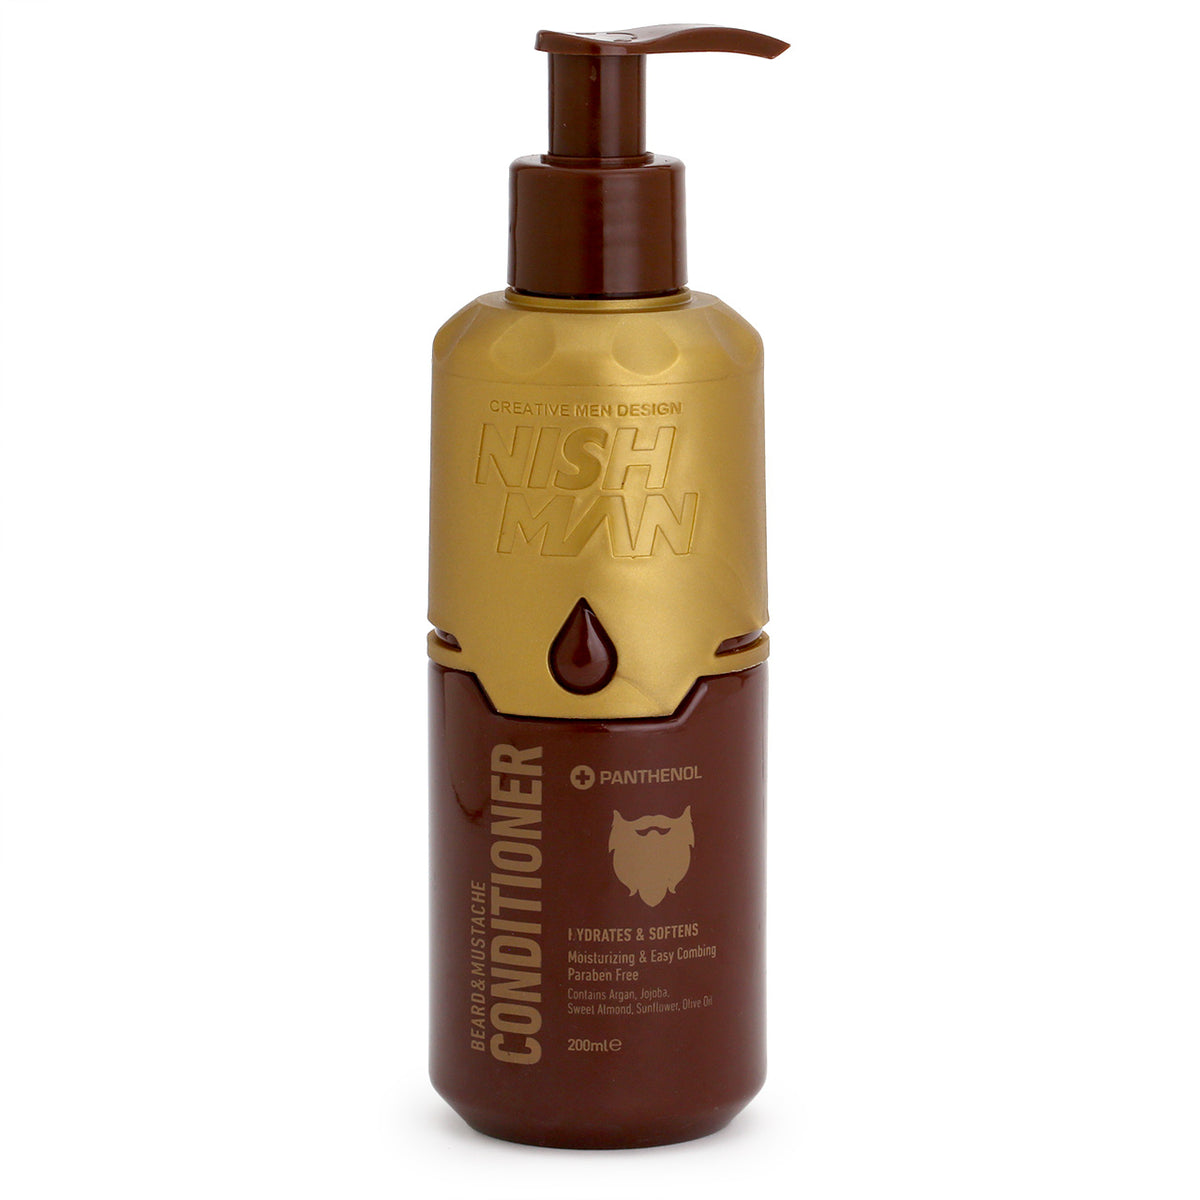 Nishman Beard &amp; Moustache Conditioner in a chocolate and gold bottle with pump dispenser